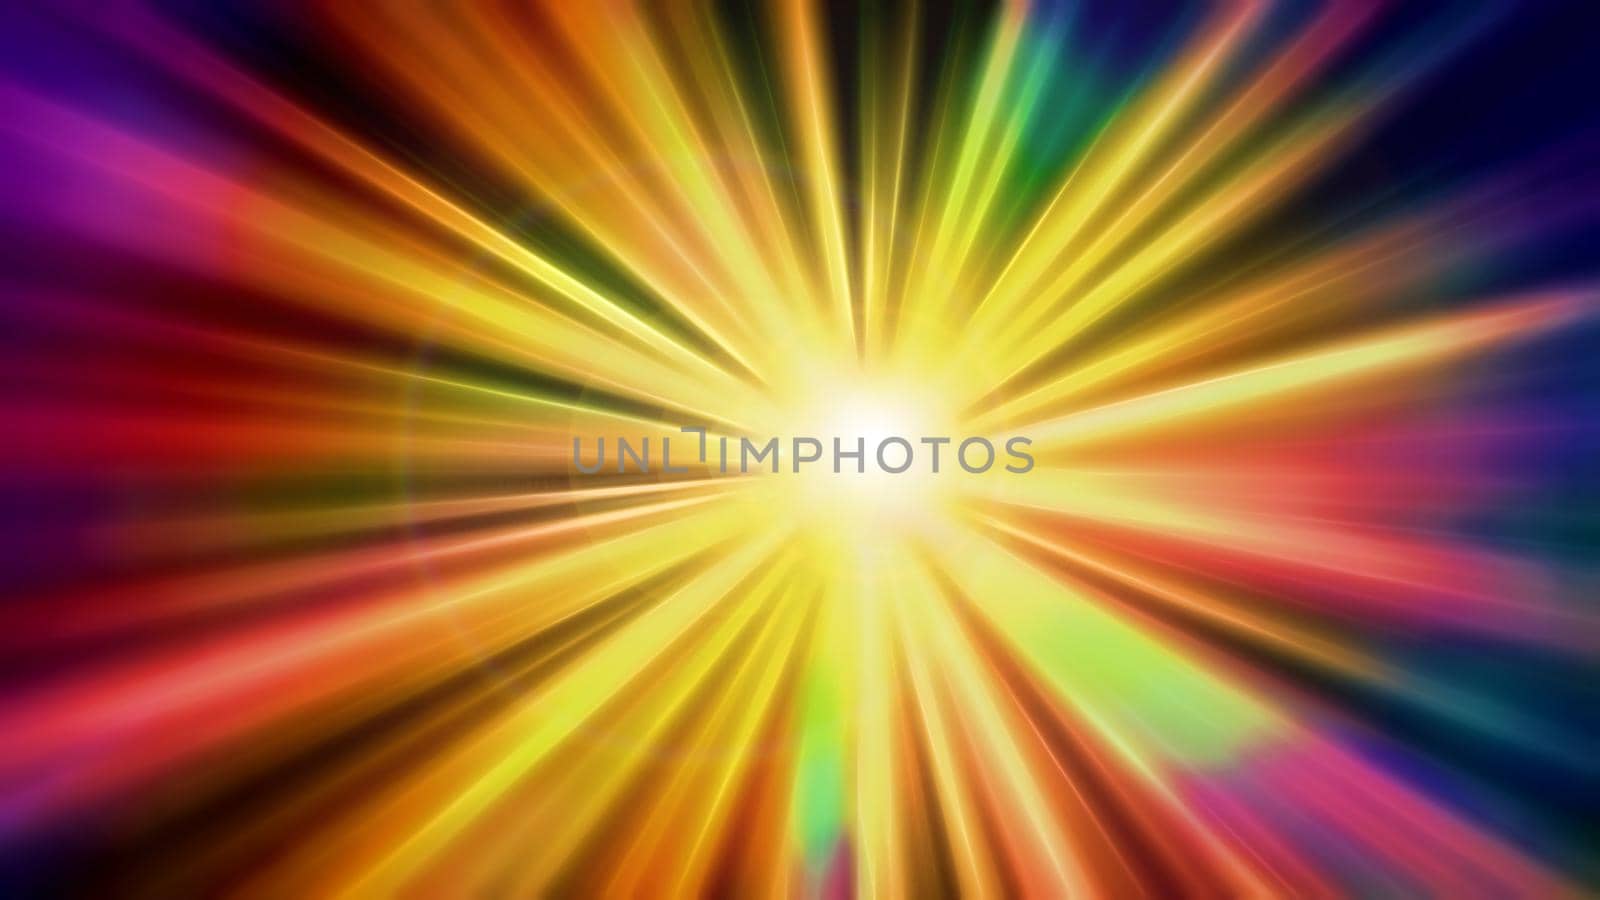 Abstract bright background with multicolored rays.